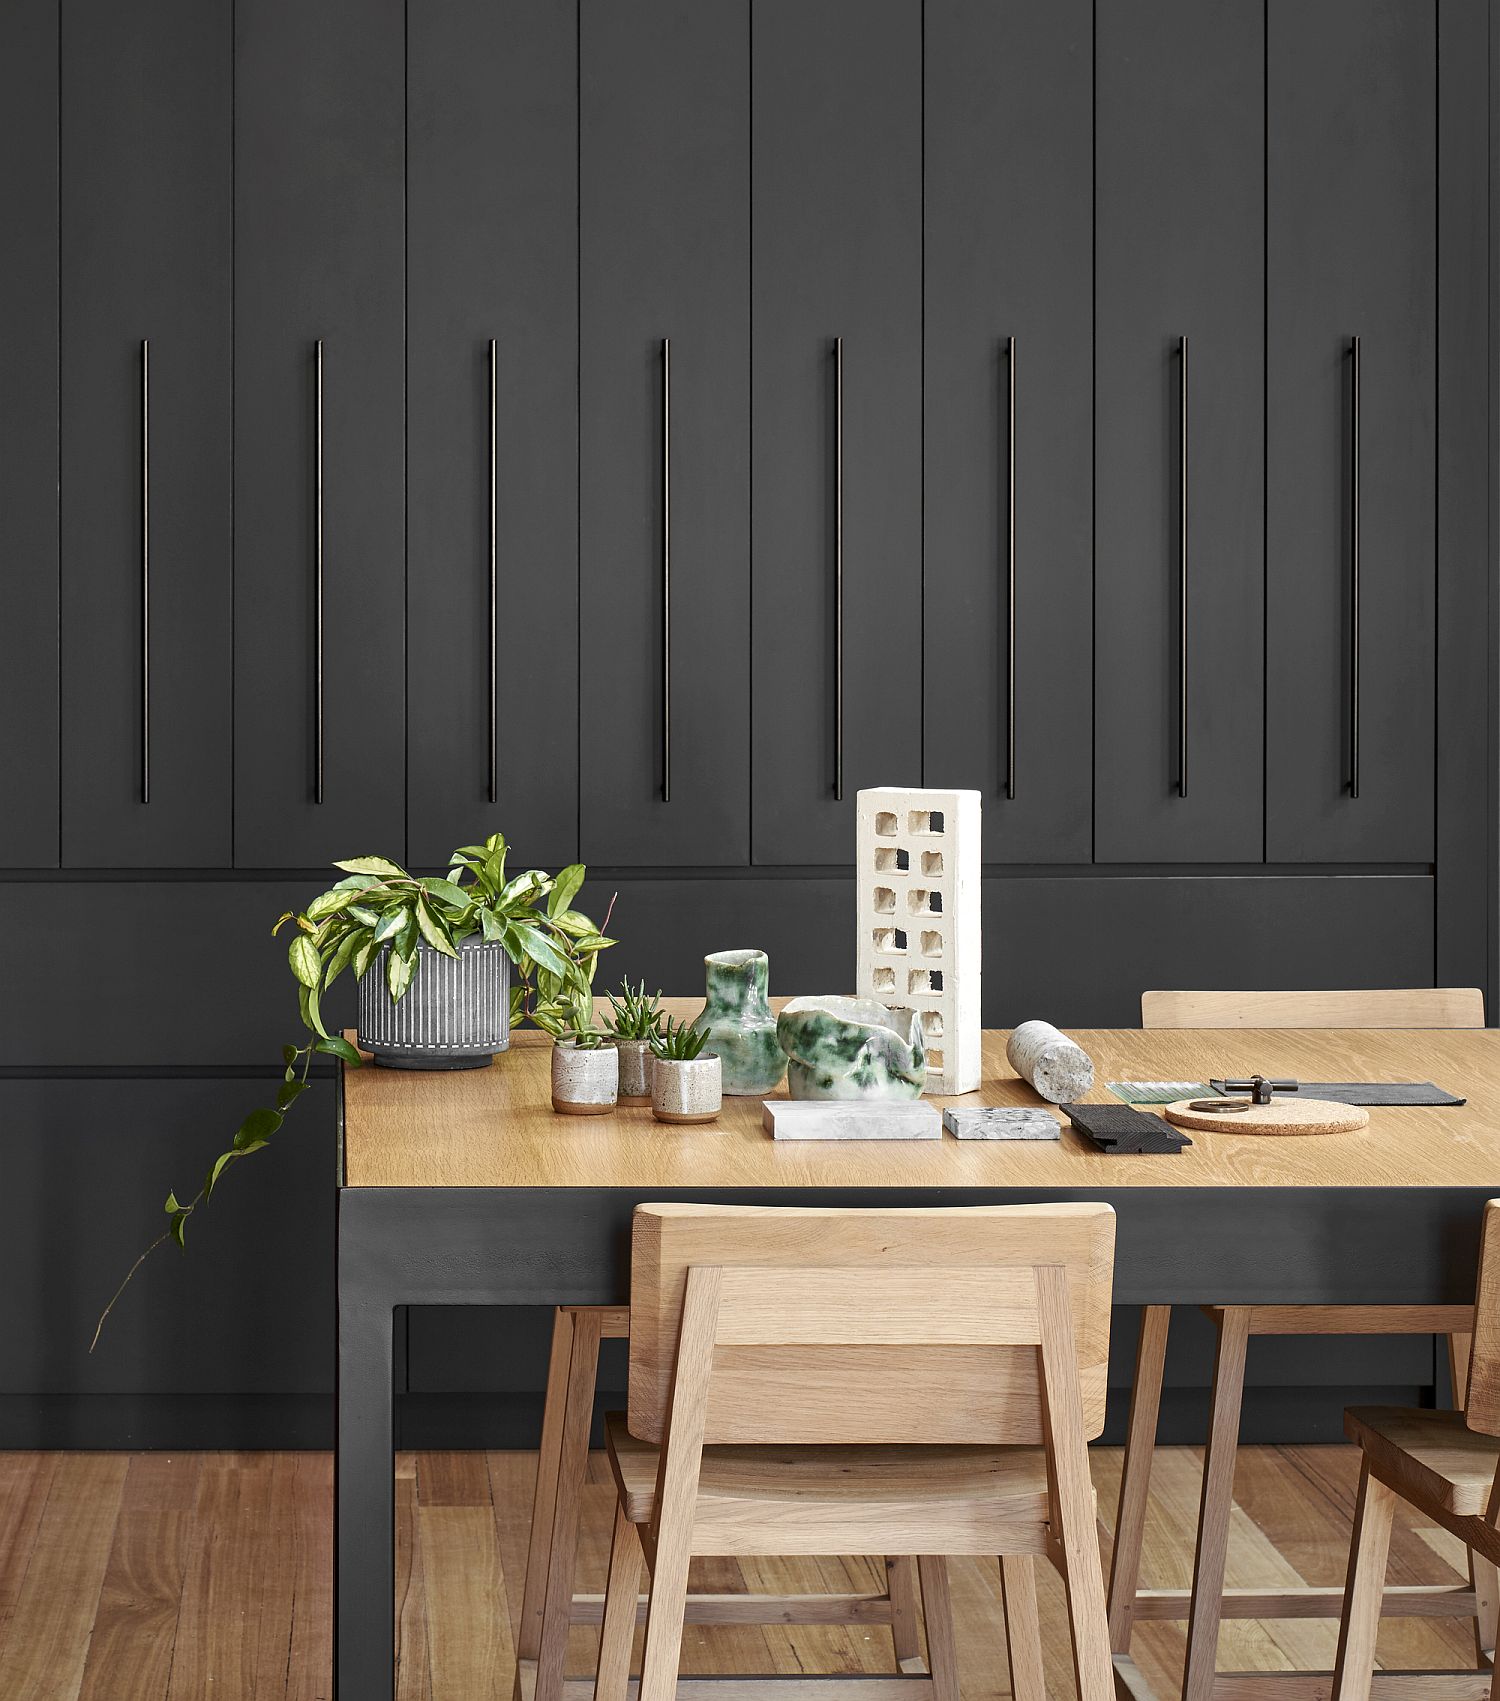 Dining-area-display-with-black-backdrop-and-wooden-dining-table